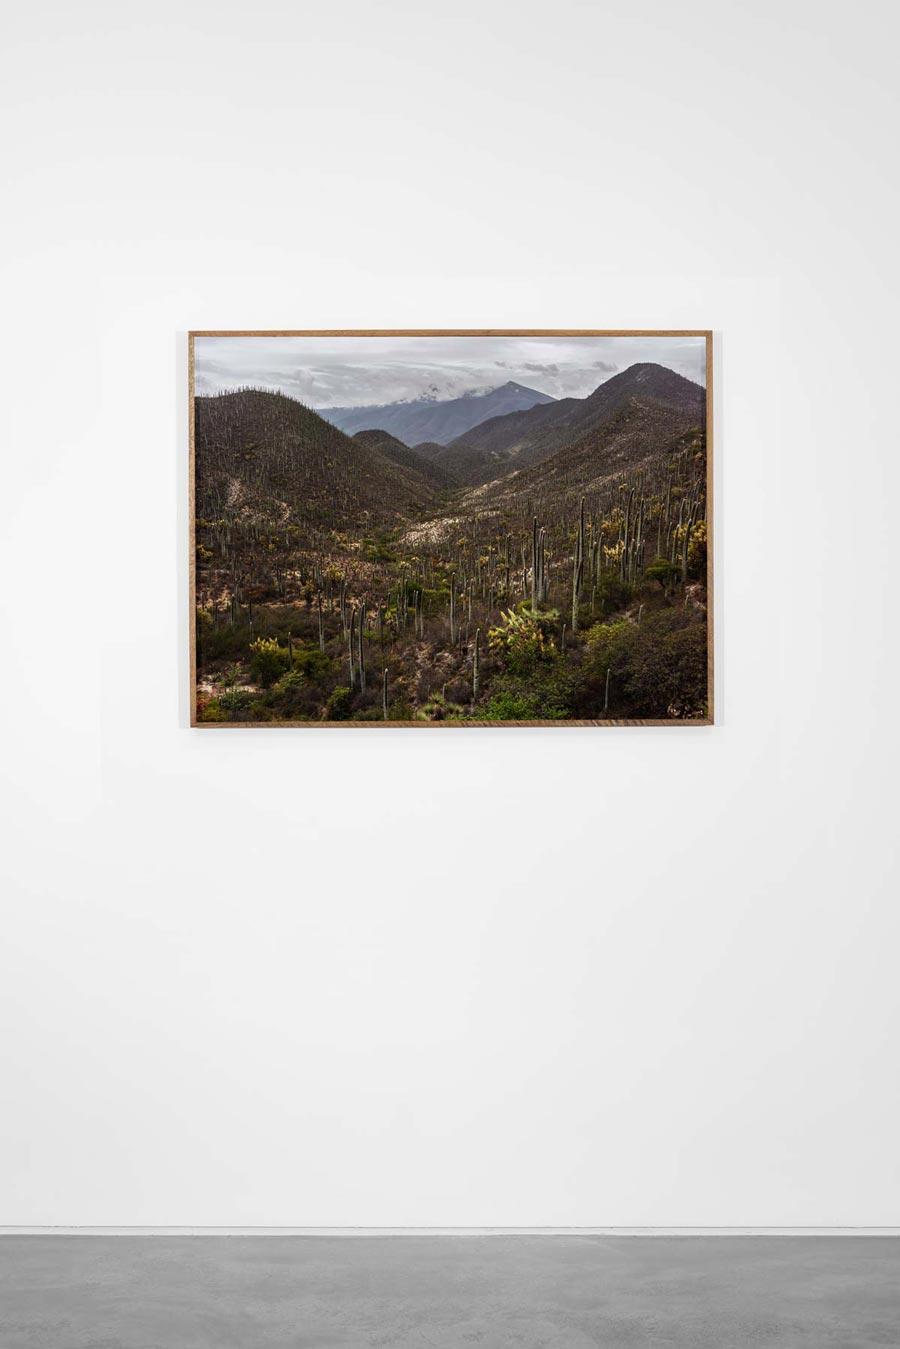 The Road Home, Between Mexico City and Oaxaca de Juárez, 2019 - Pieter Hugo 
Signed on reverse
Archival pigment print

Available in two sizes:
29 1/2 x 39 1/2 inches, edition of 7 + 2 APs
39 1/2 x 52 1/2 inches, edition of 7 + 2 APs

Pieter Hugo